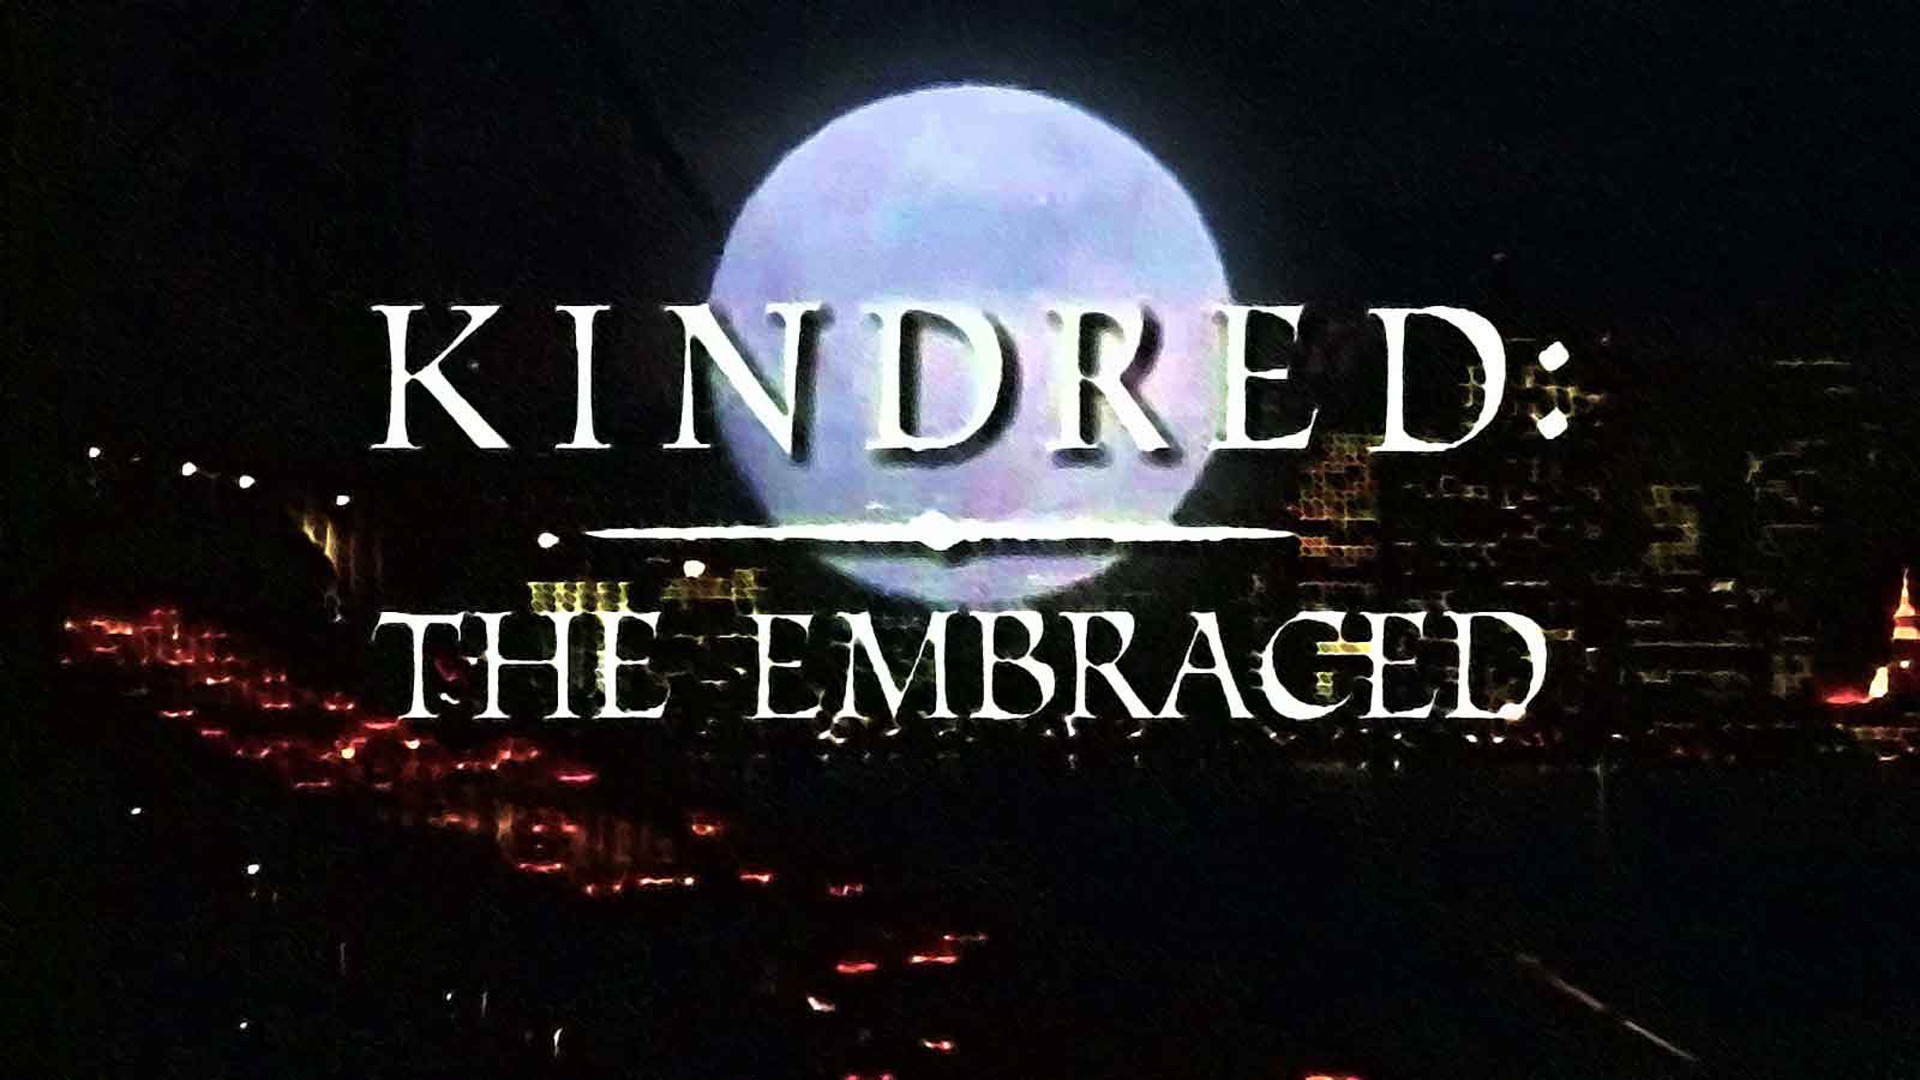 Show Kindred: The Embraced